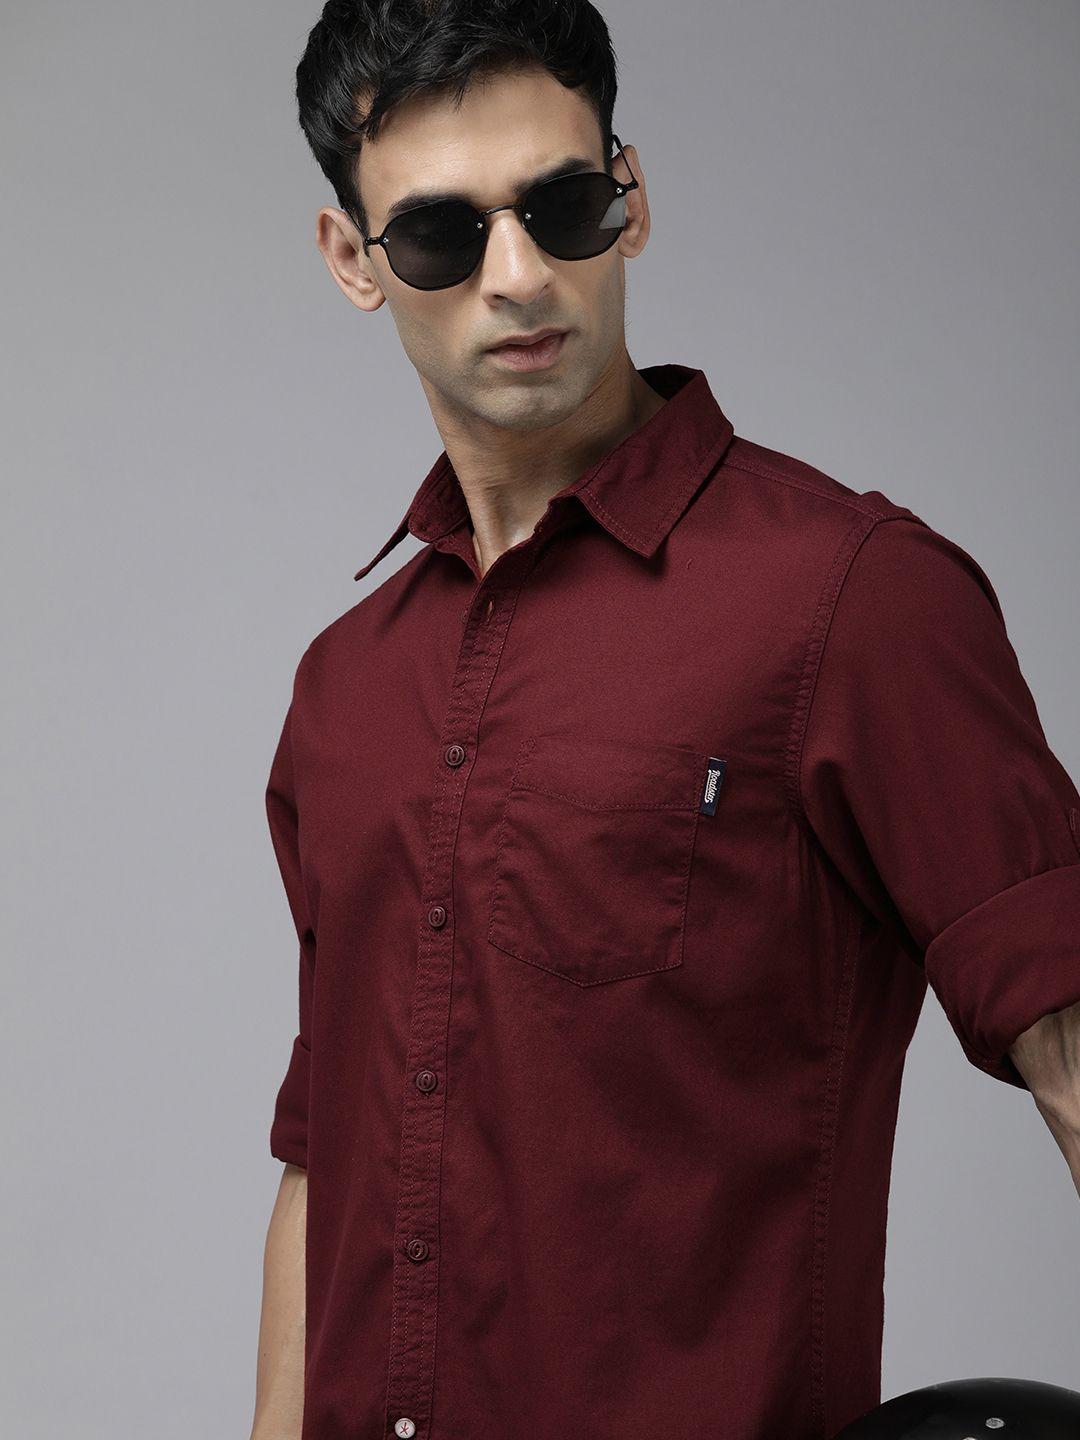 the roadster lifestyle co. men pure cotton casual shirt